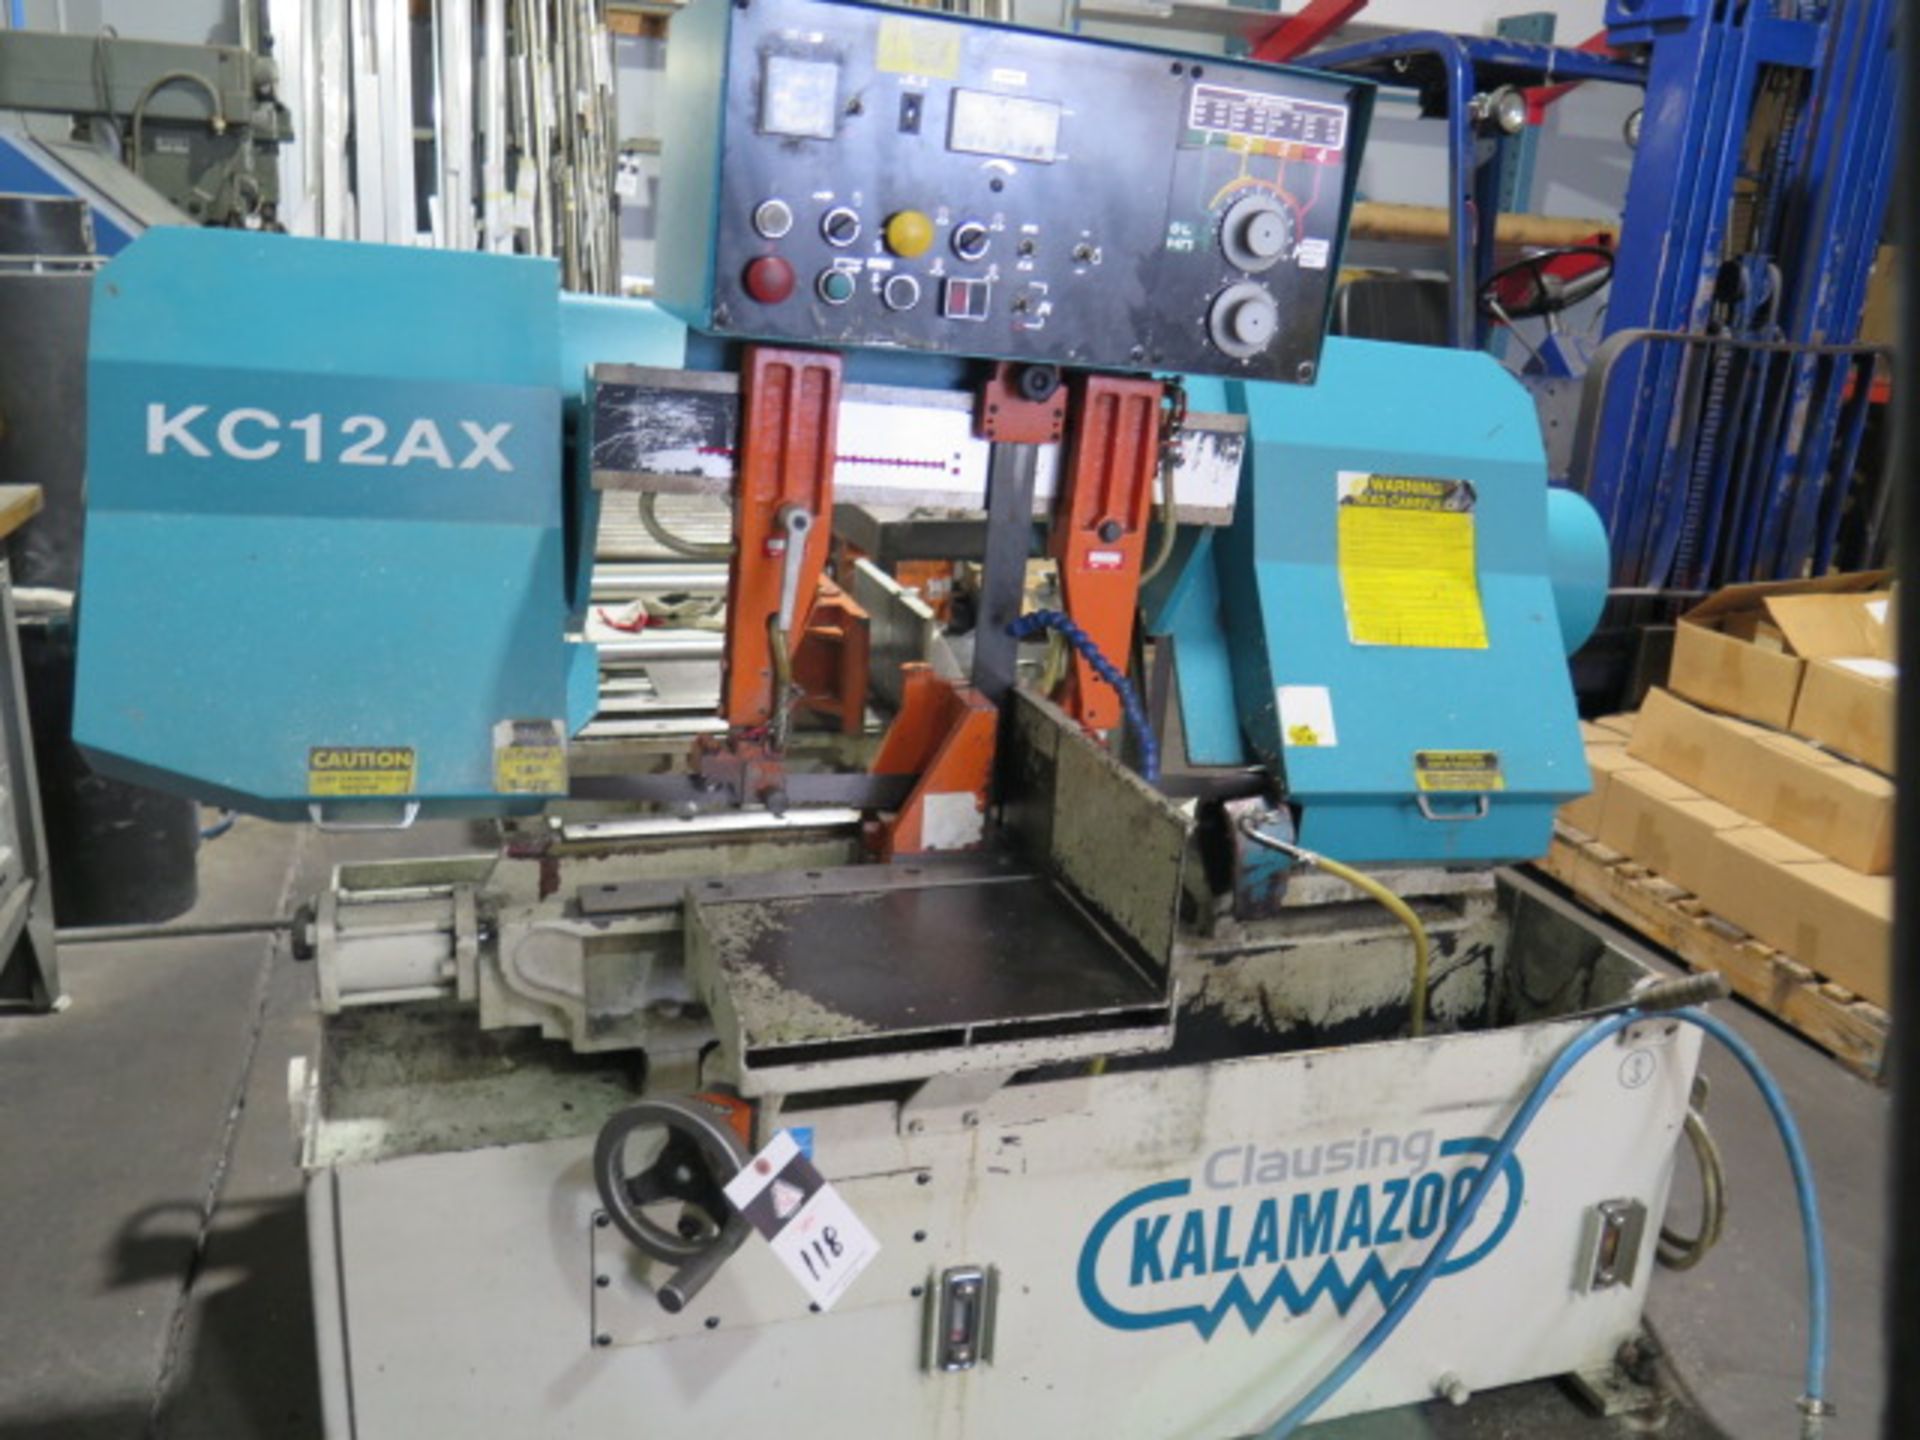 Clausing Kalamazoo KC12AX 12” Auto Horizontal Band Saw s/n H00614248 w/ Hyd Clamping, SOLD AS IS - Image 3 of 15